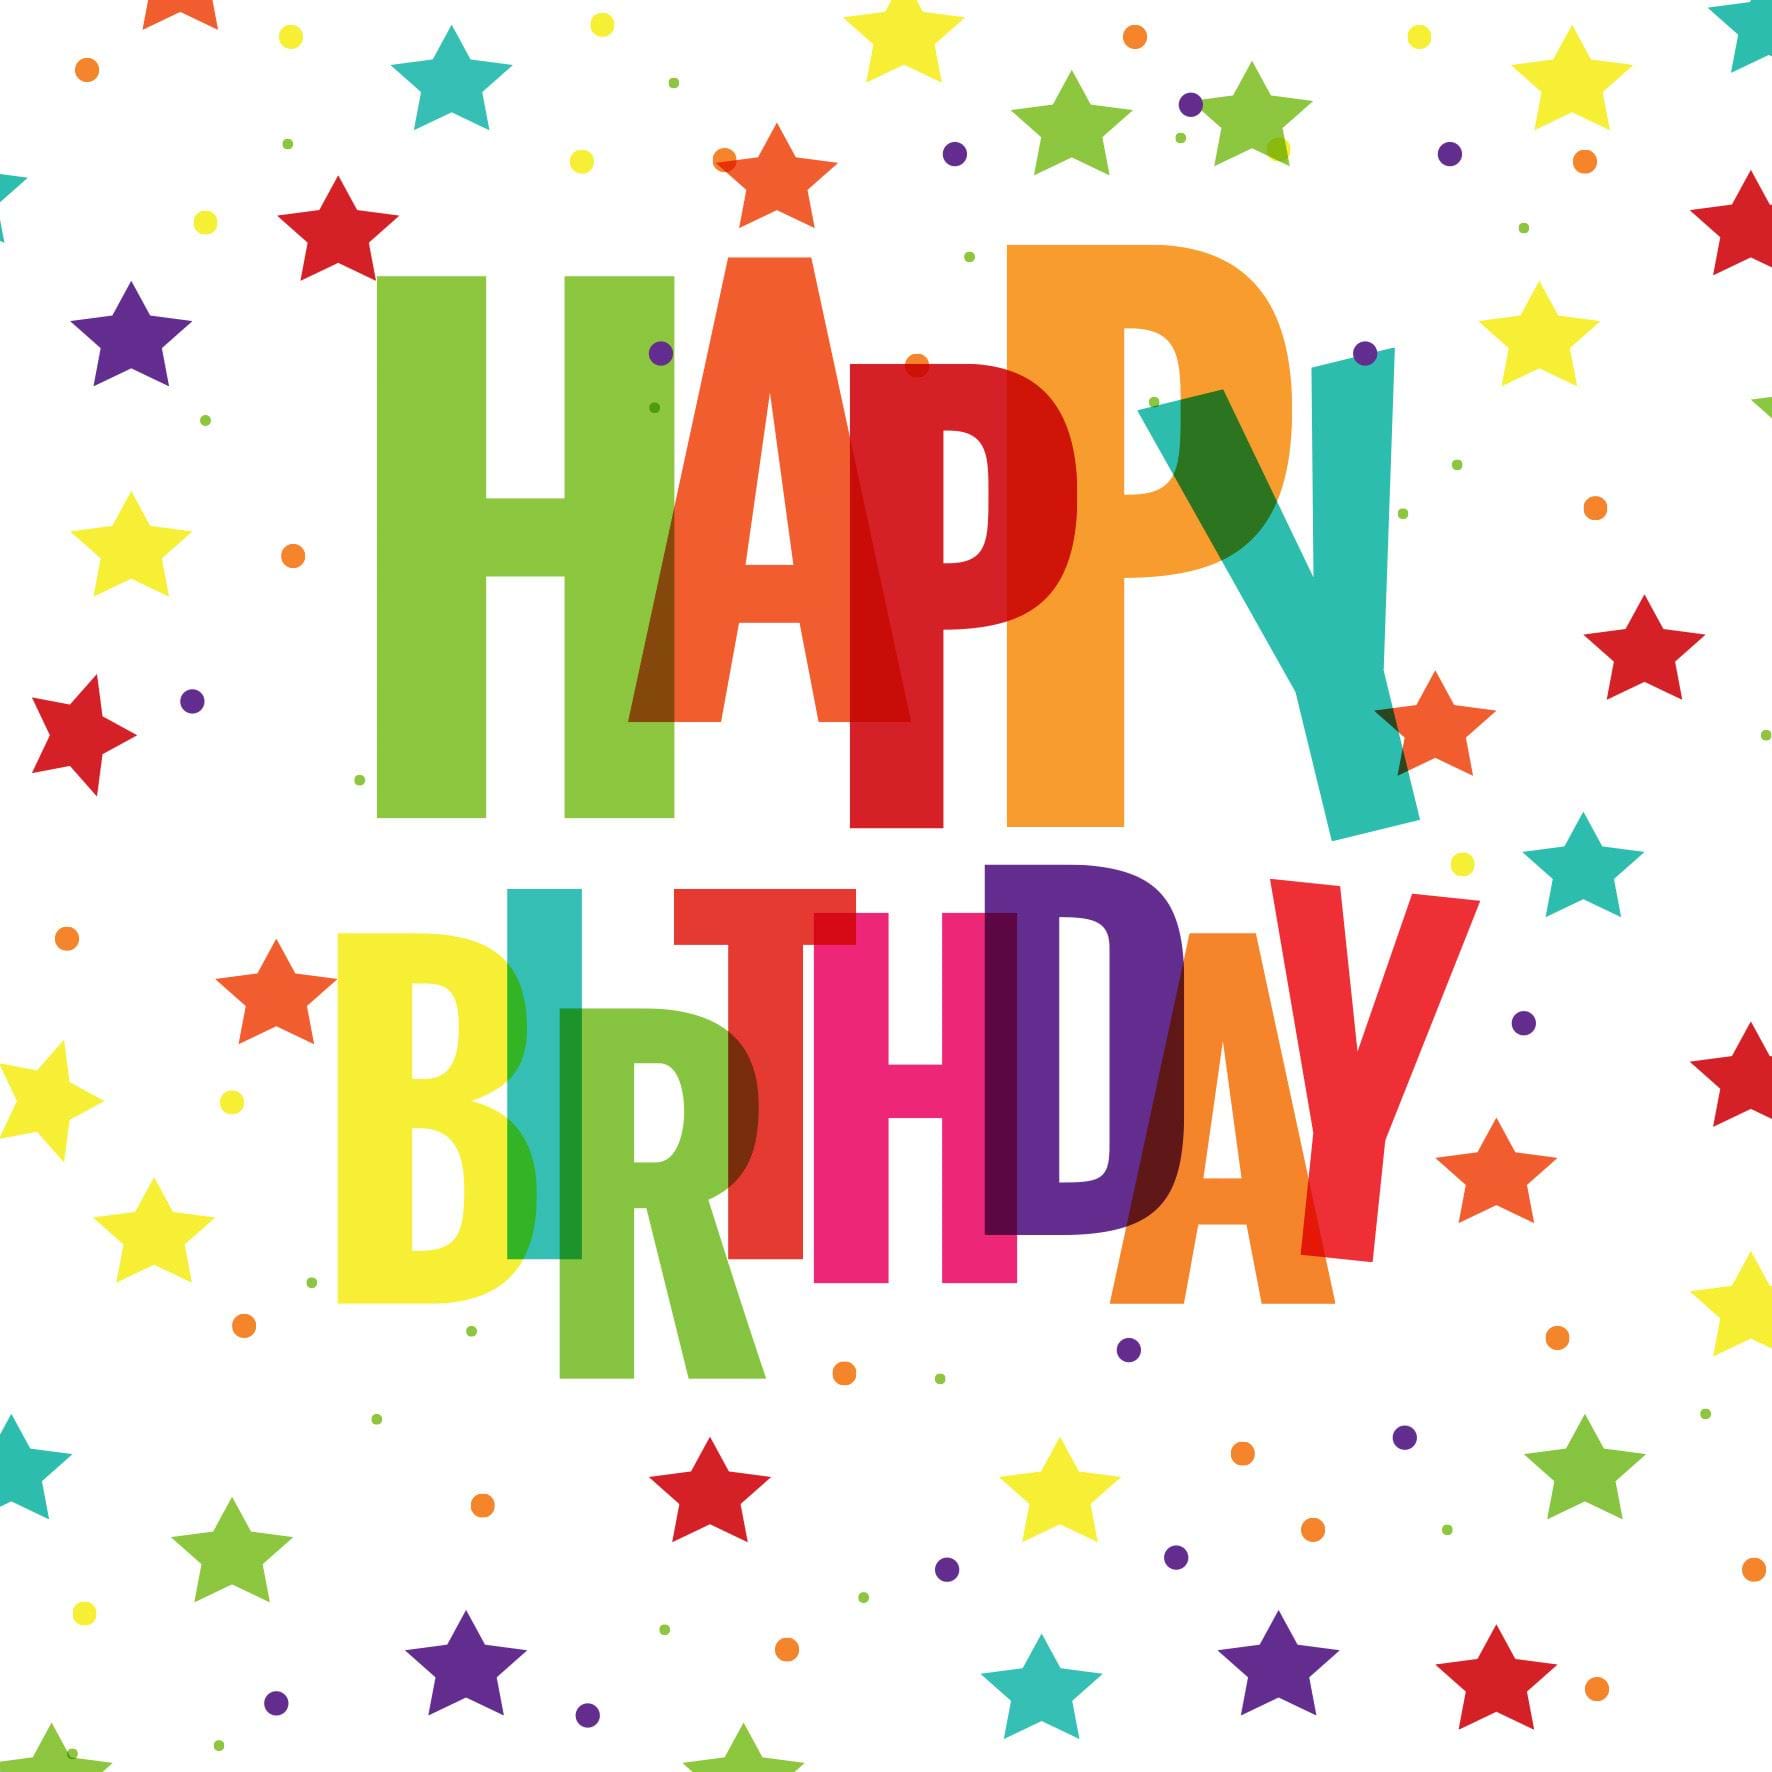 Colourful Letters and Stars Birthday Card